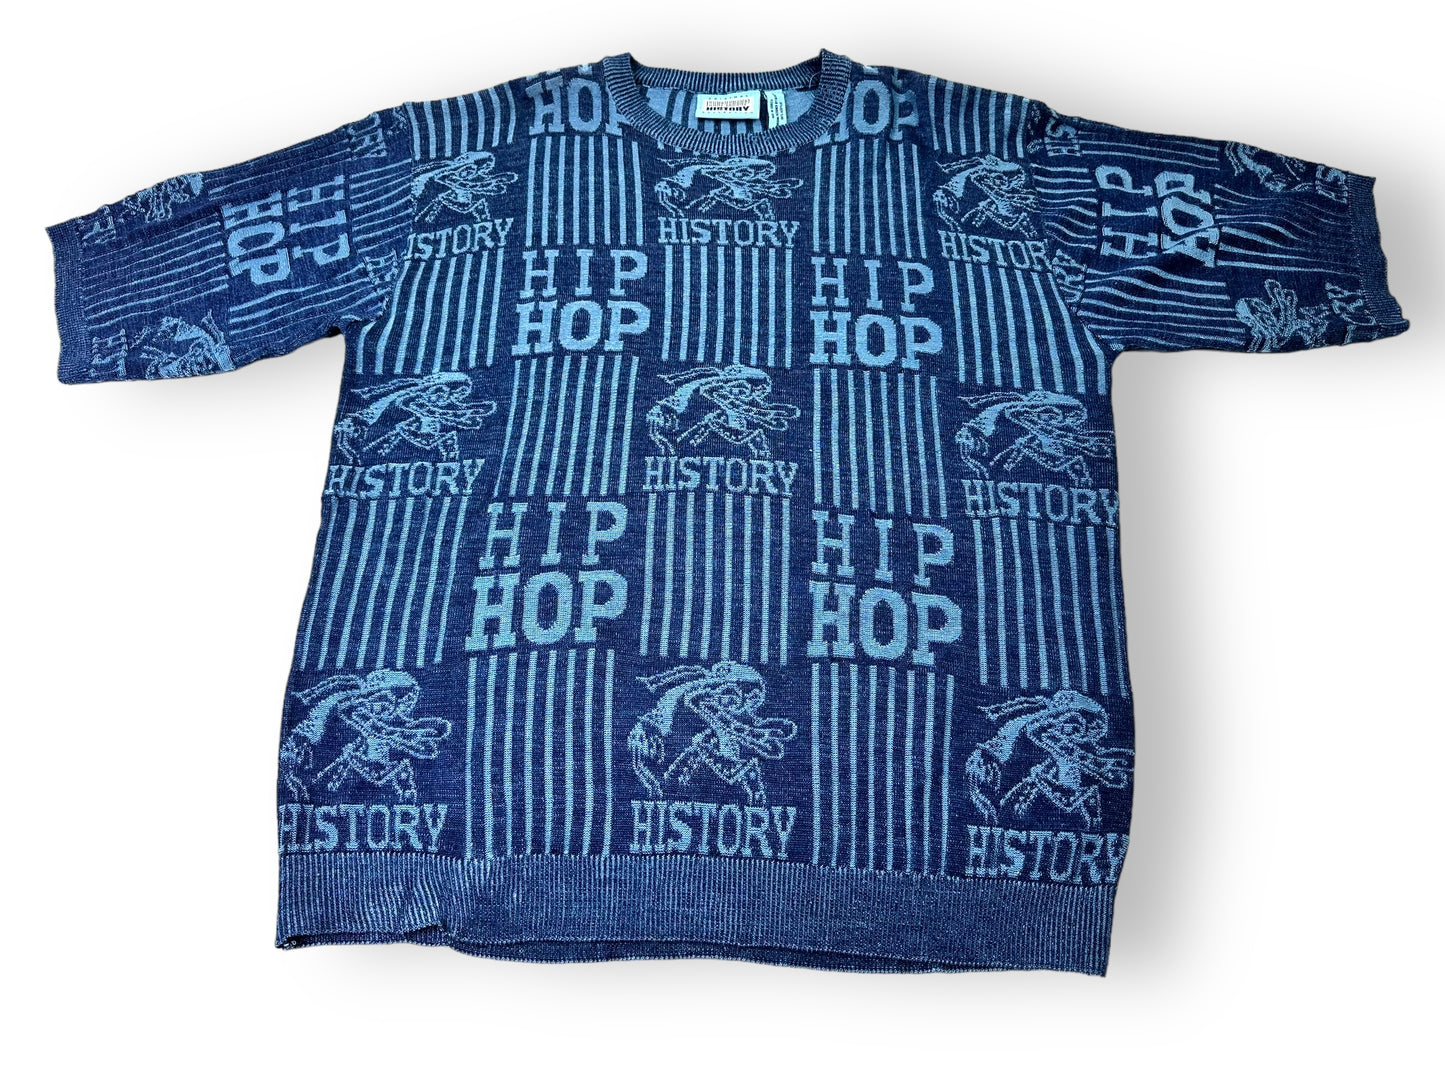 Andersonville: 1990s “Original Hip Hop” Collection Short Sleeve Sweater